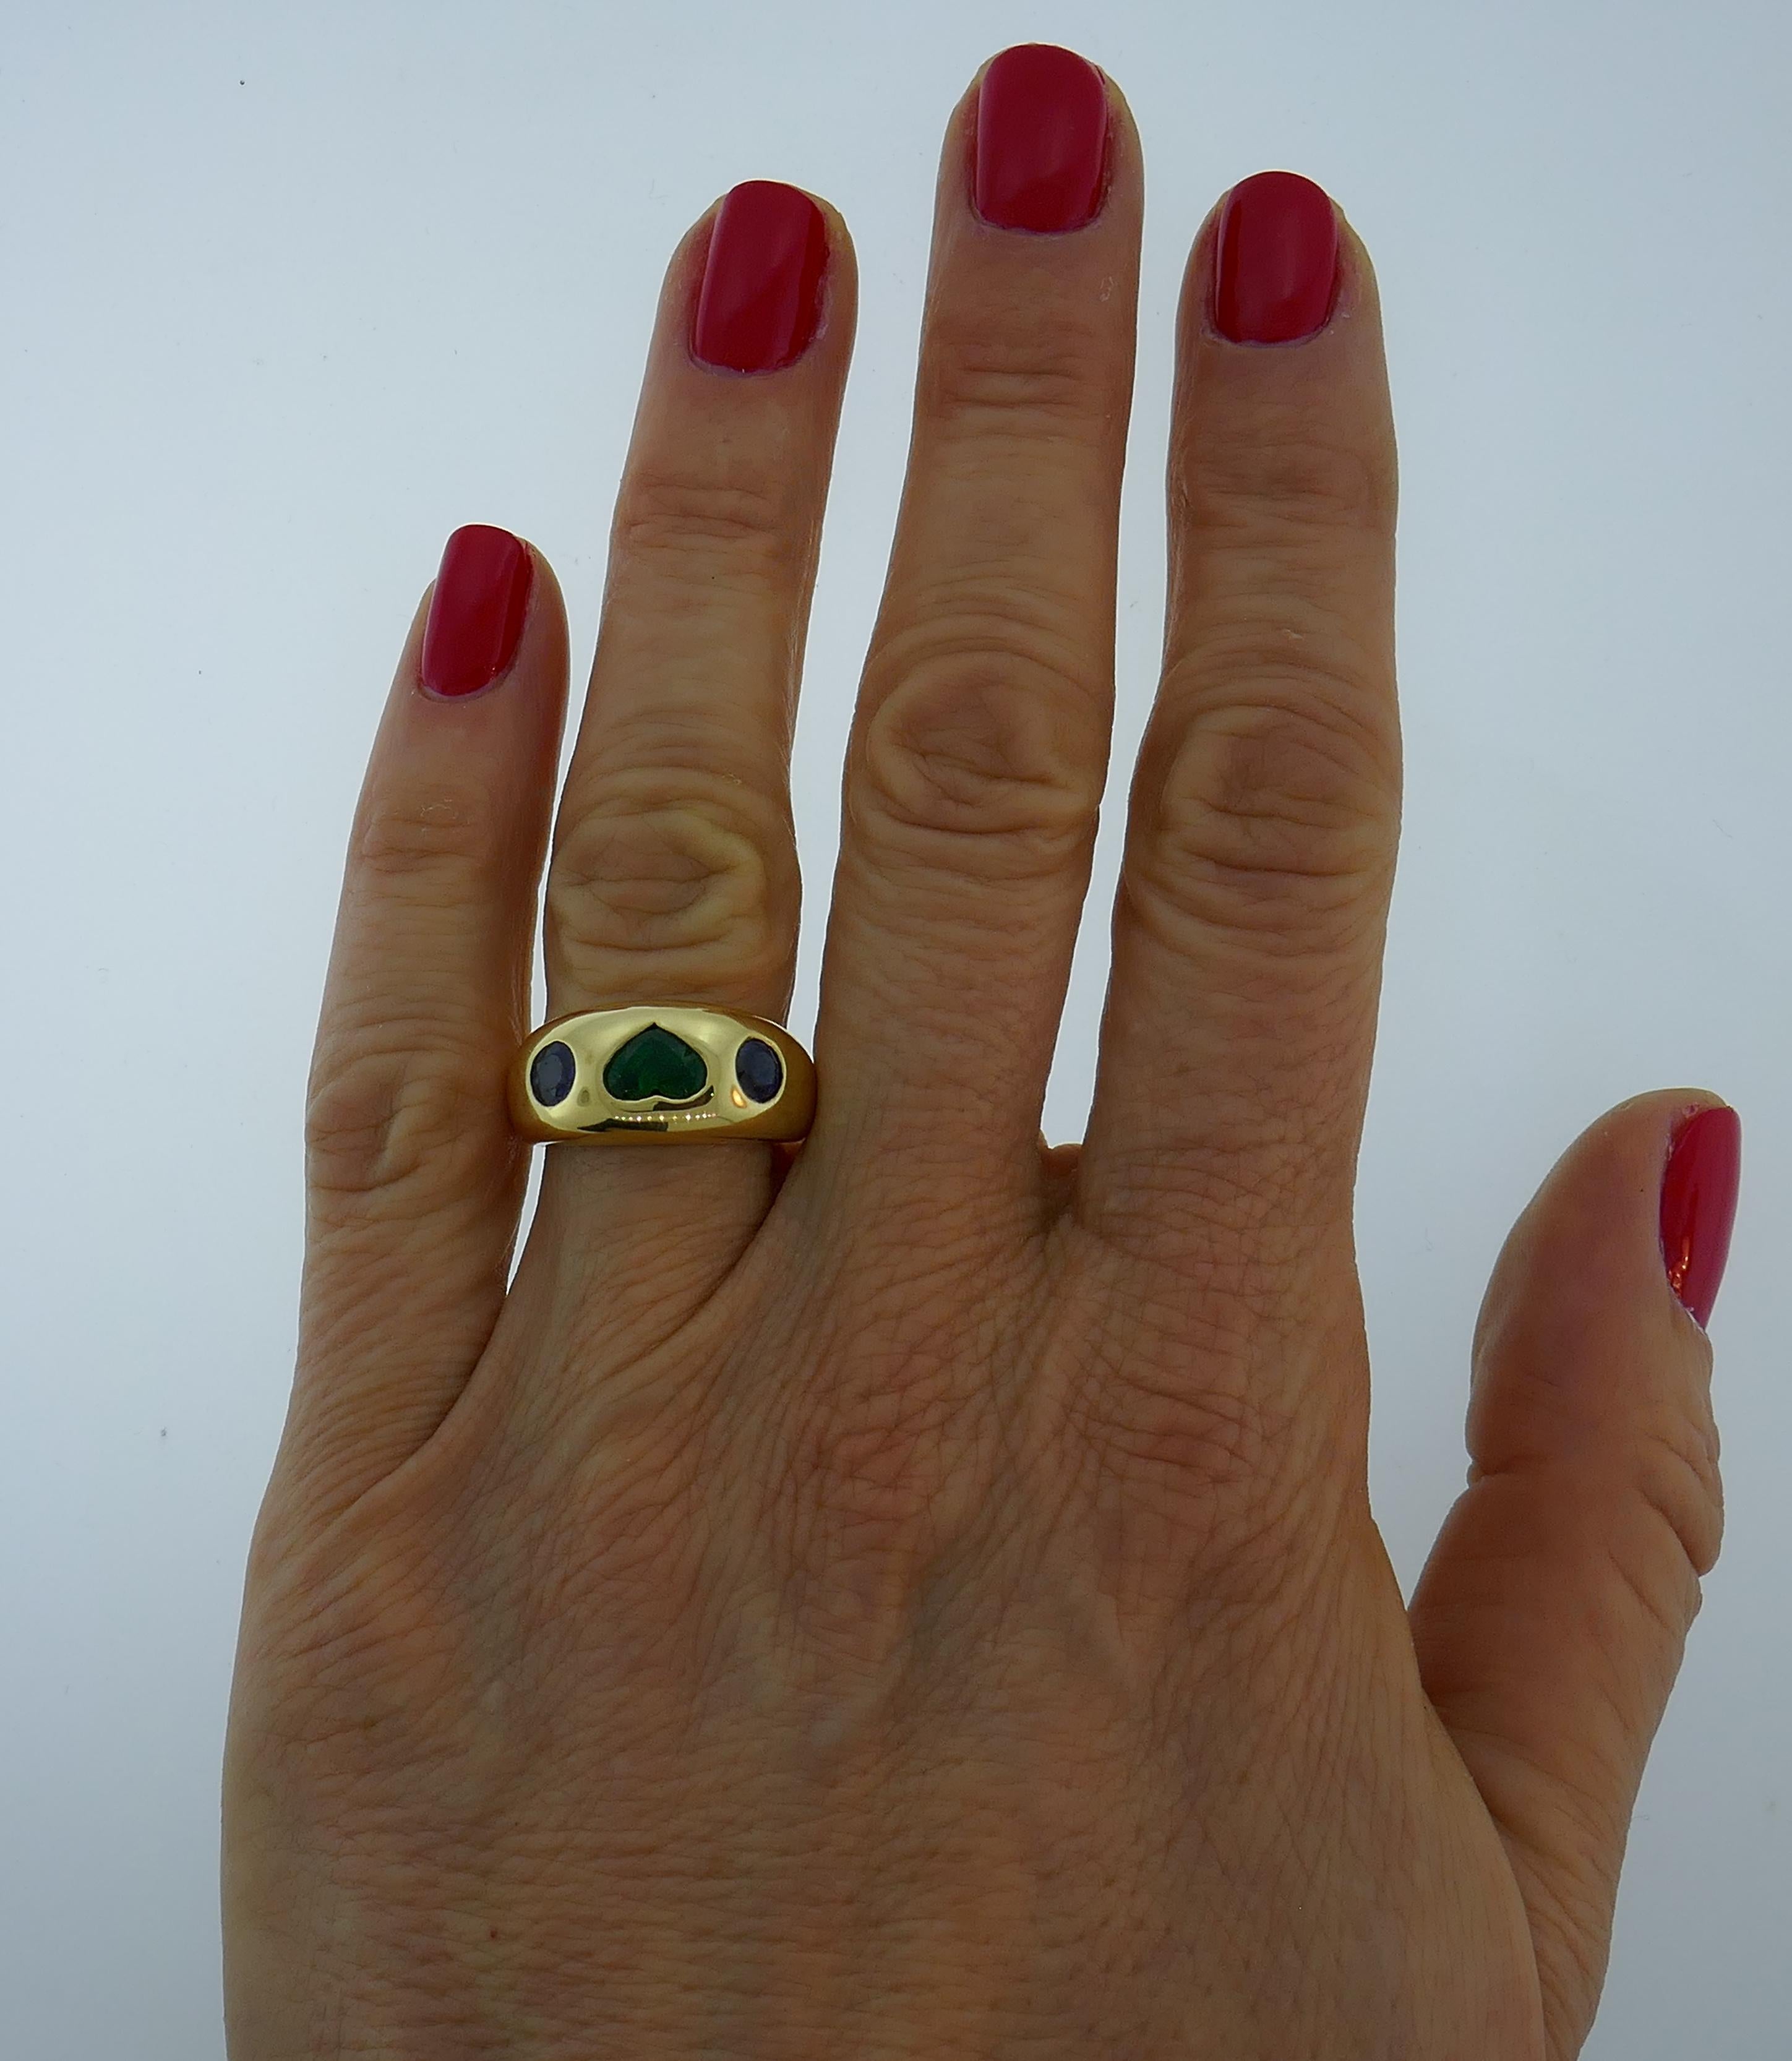 Beautiful ring created by Bulgari in Italy in the 1980s. Features an approximately 1.12-carat heart-shaped faceted emerald set in 18 karat yellow gold and accented with two 0.18-carat each round faceted sapphires. Timeless, classy and wearable, the